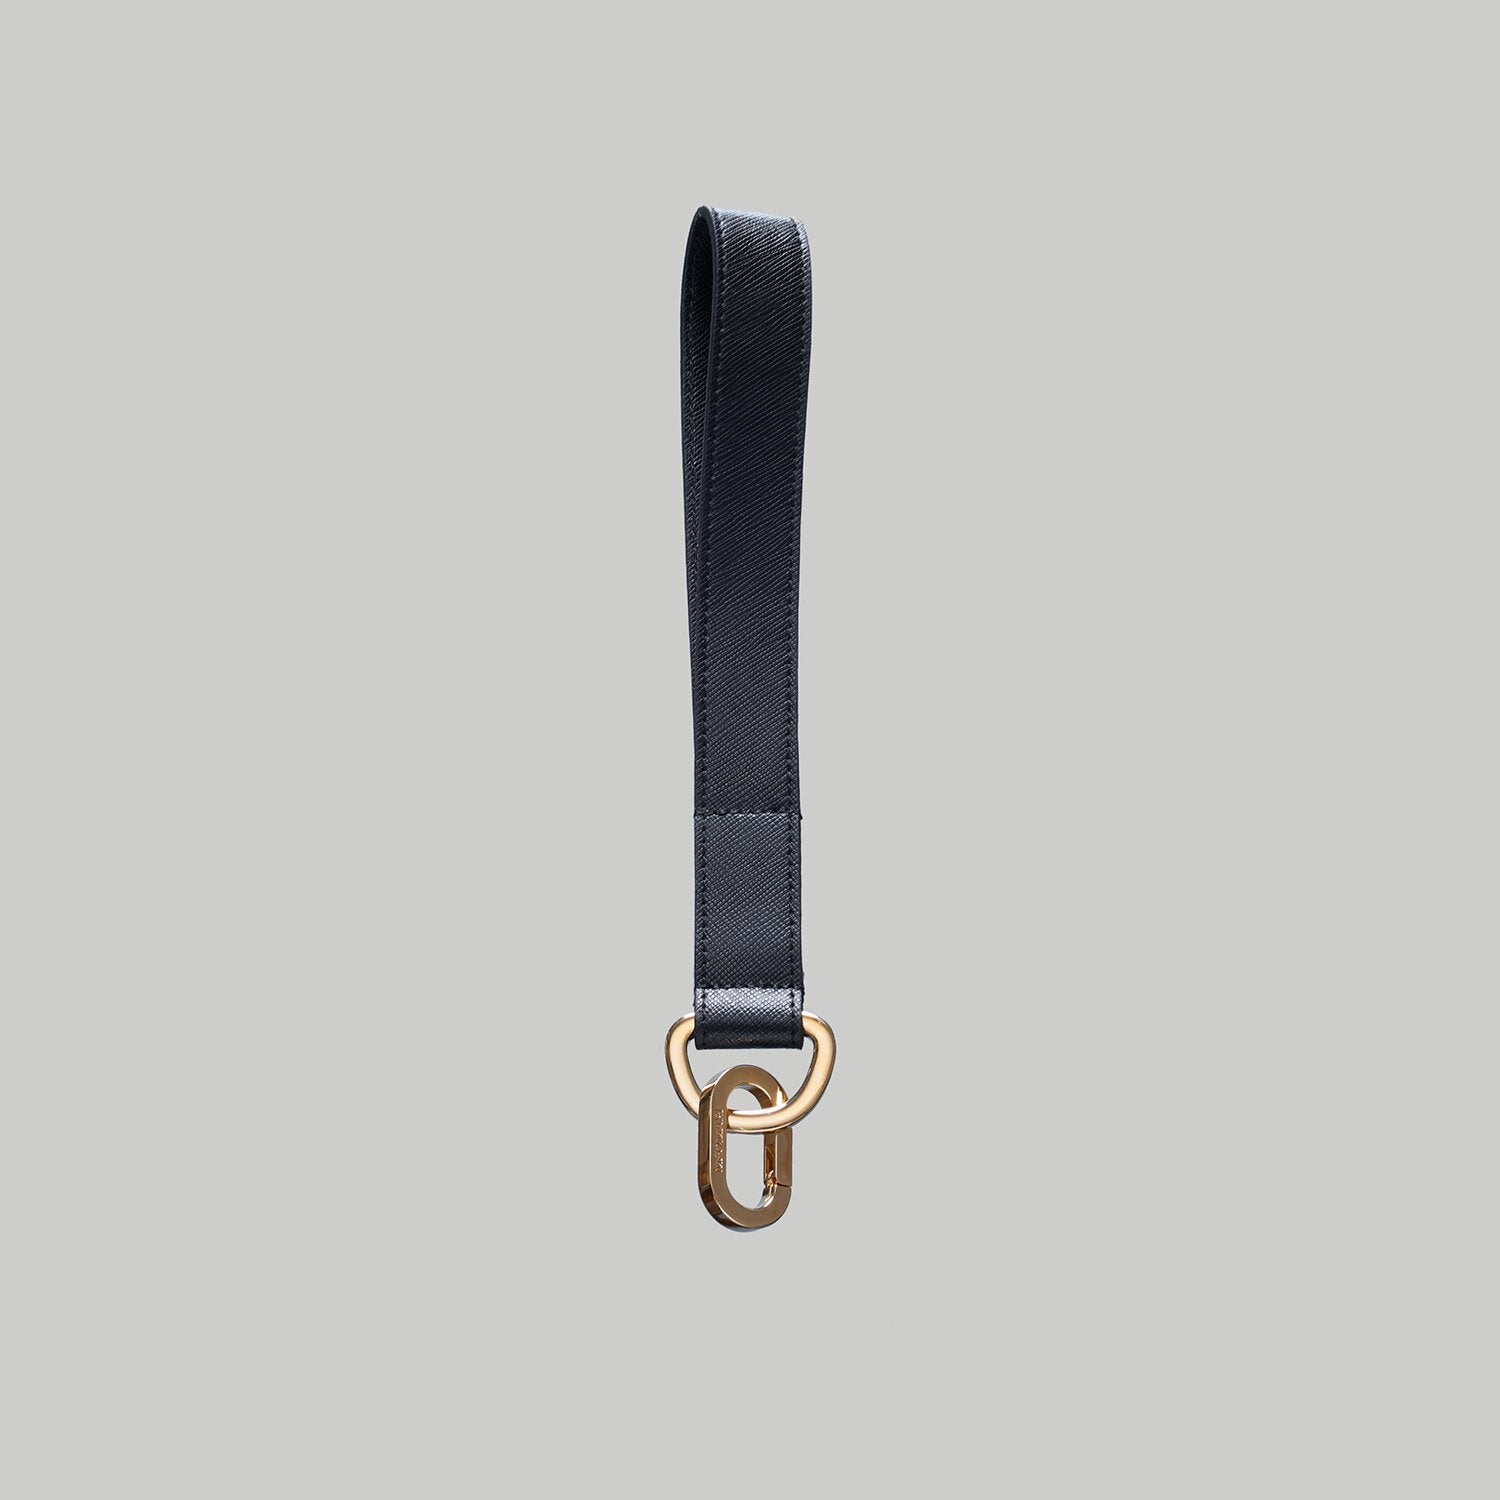 Luxury dog leash handle in black Saffiano leather with Gold